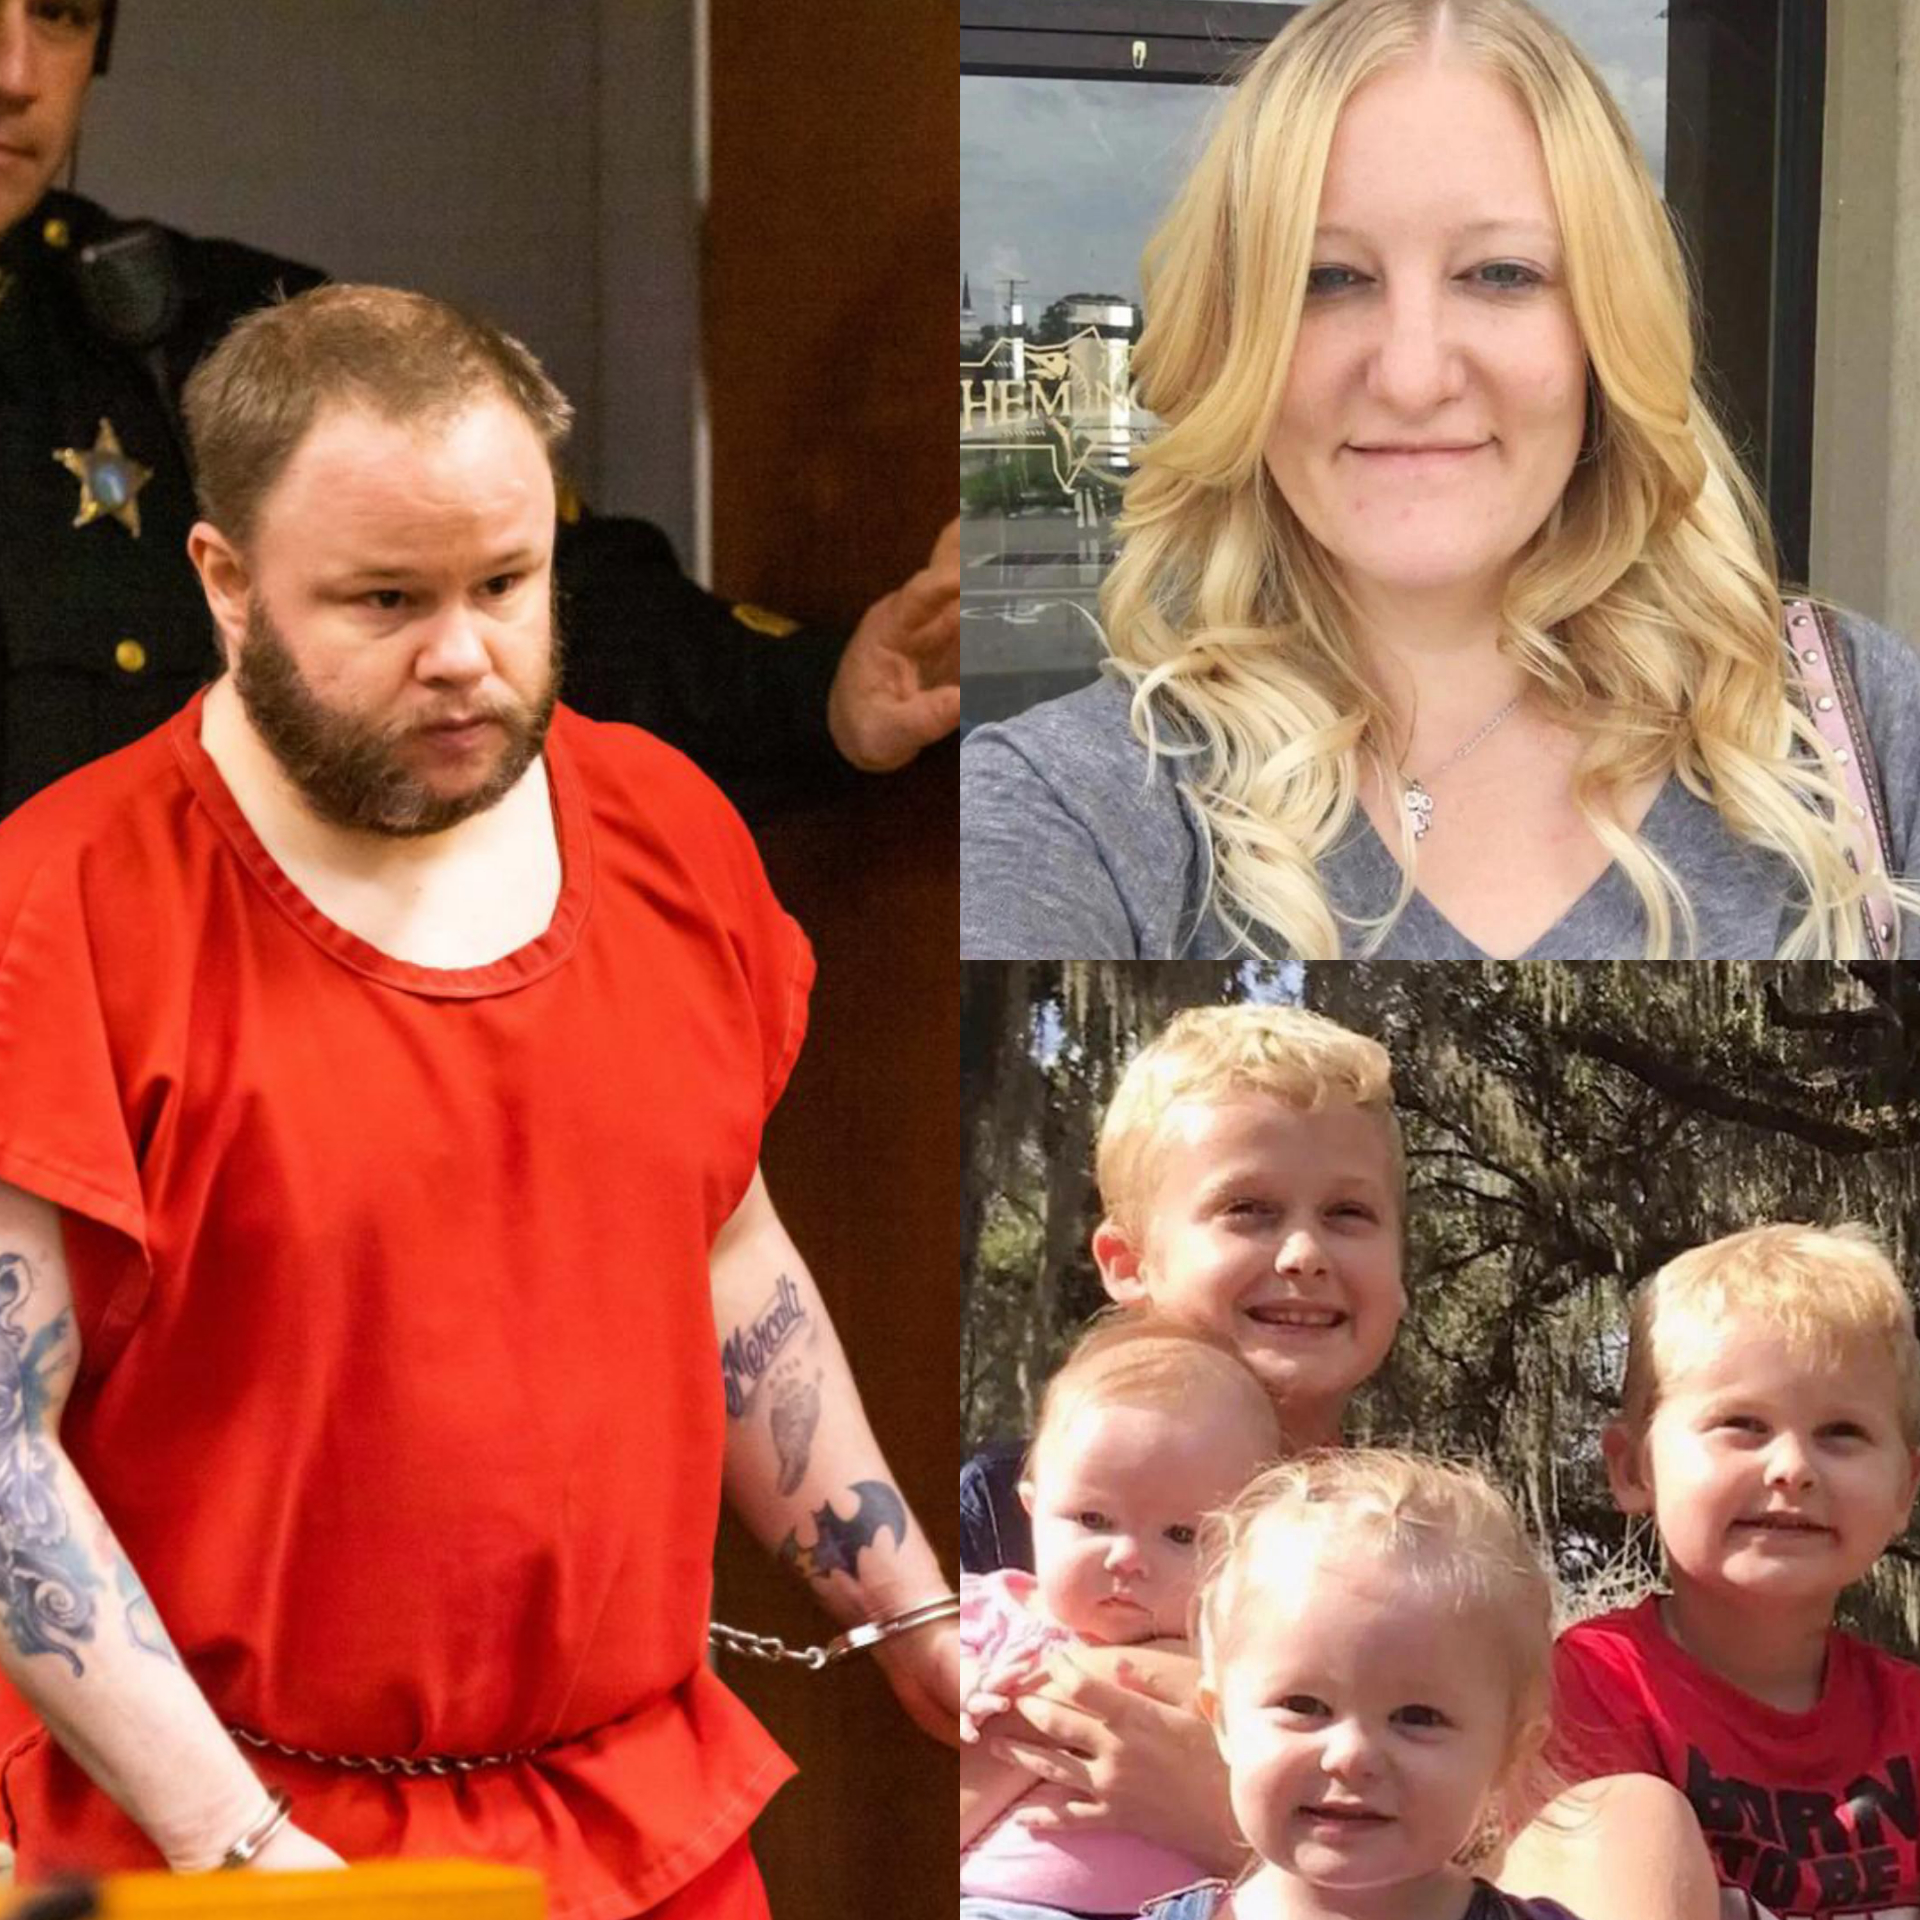 MAN WHO MURDERED HIS WIFE WITH A BAT AND STRANGLED HIS 4 KIDS SENTENCED TO DEATH